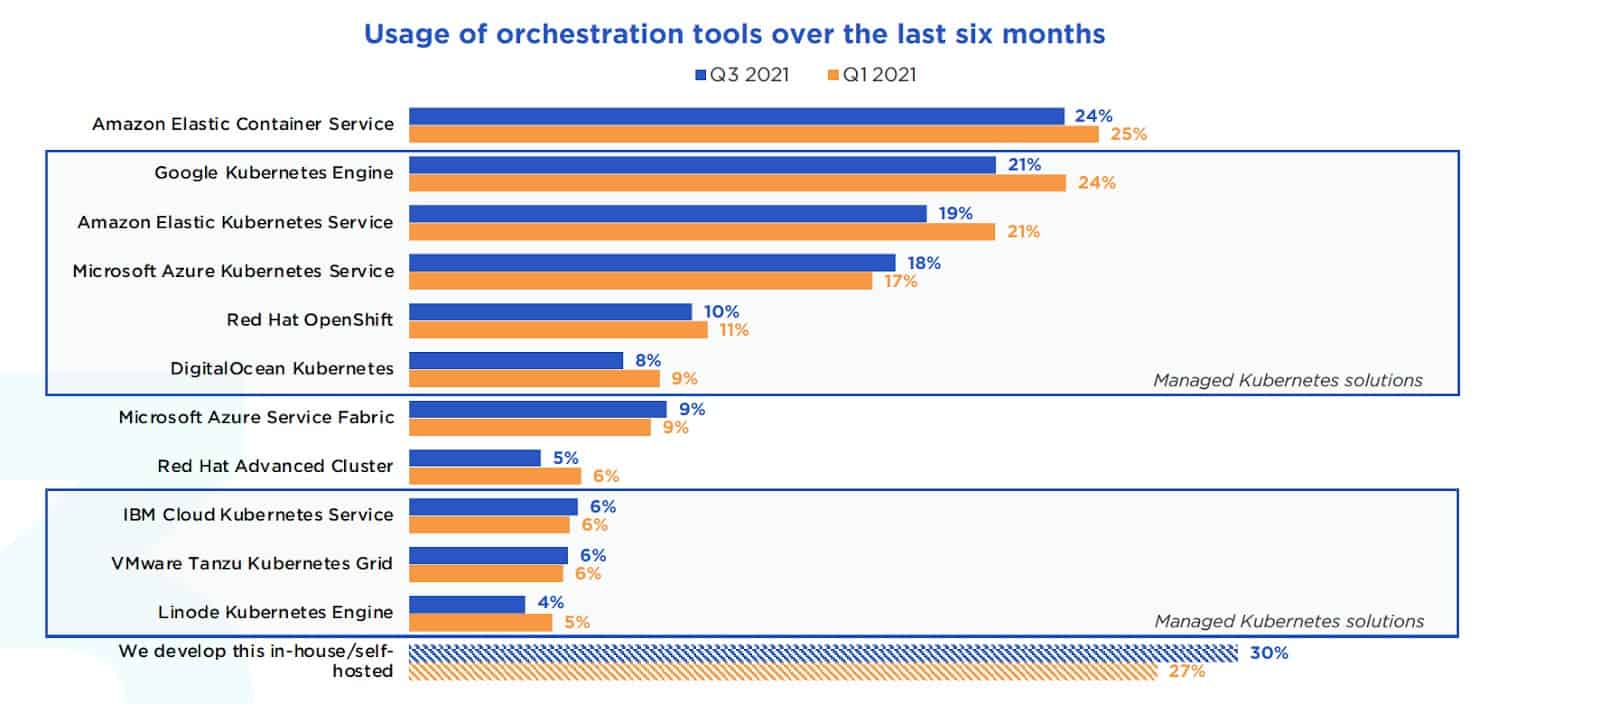 Bar chart shows usage of orchestration tools over the last six months (Q3 2021 and Q1 2021)